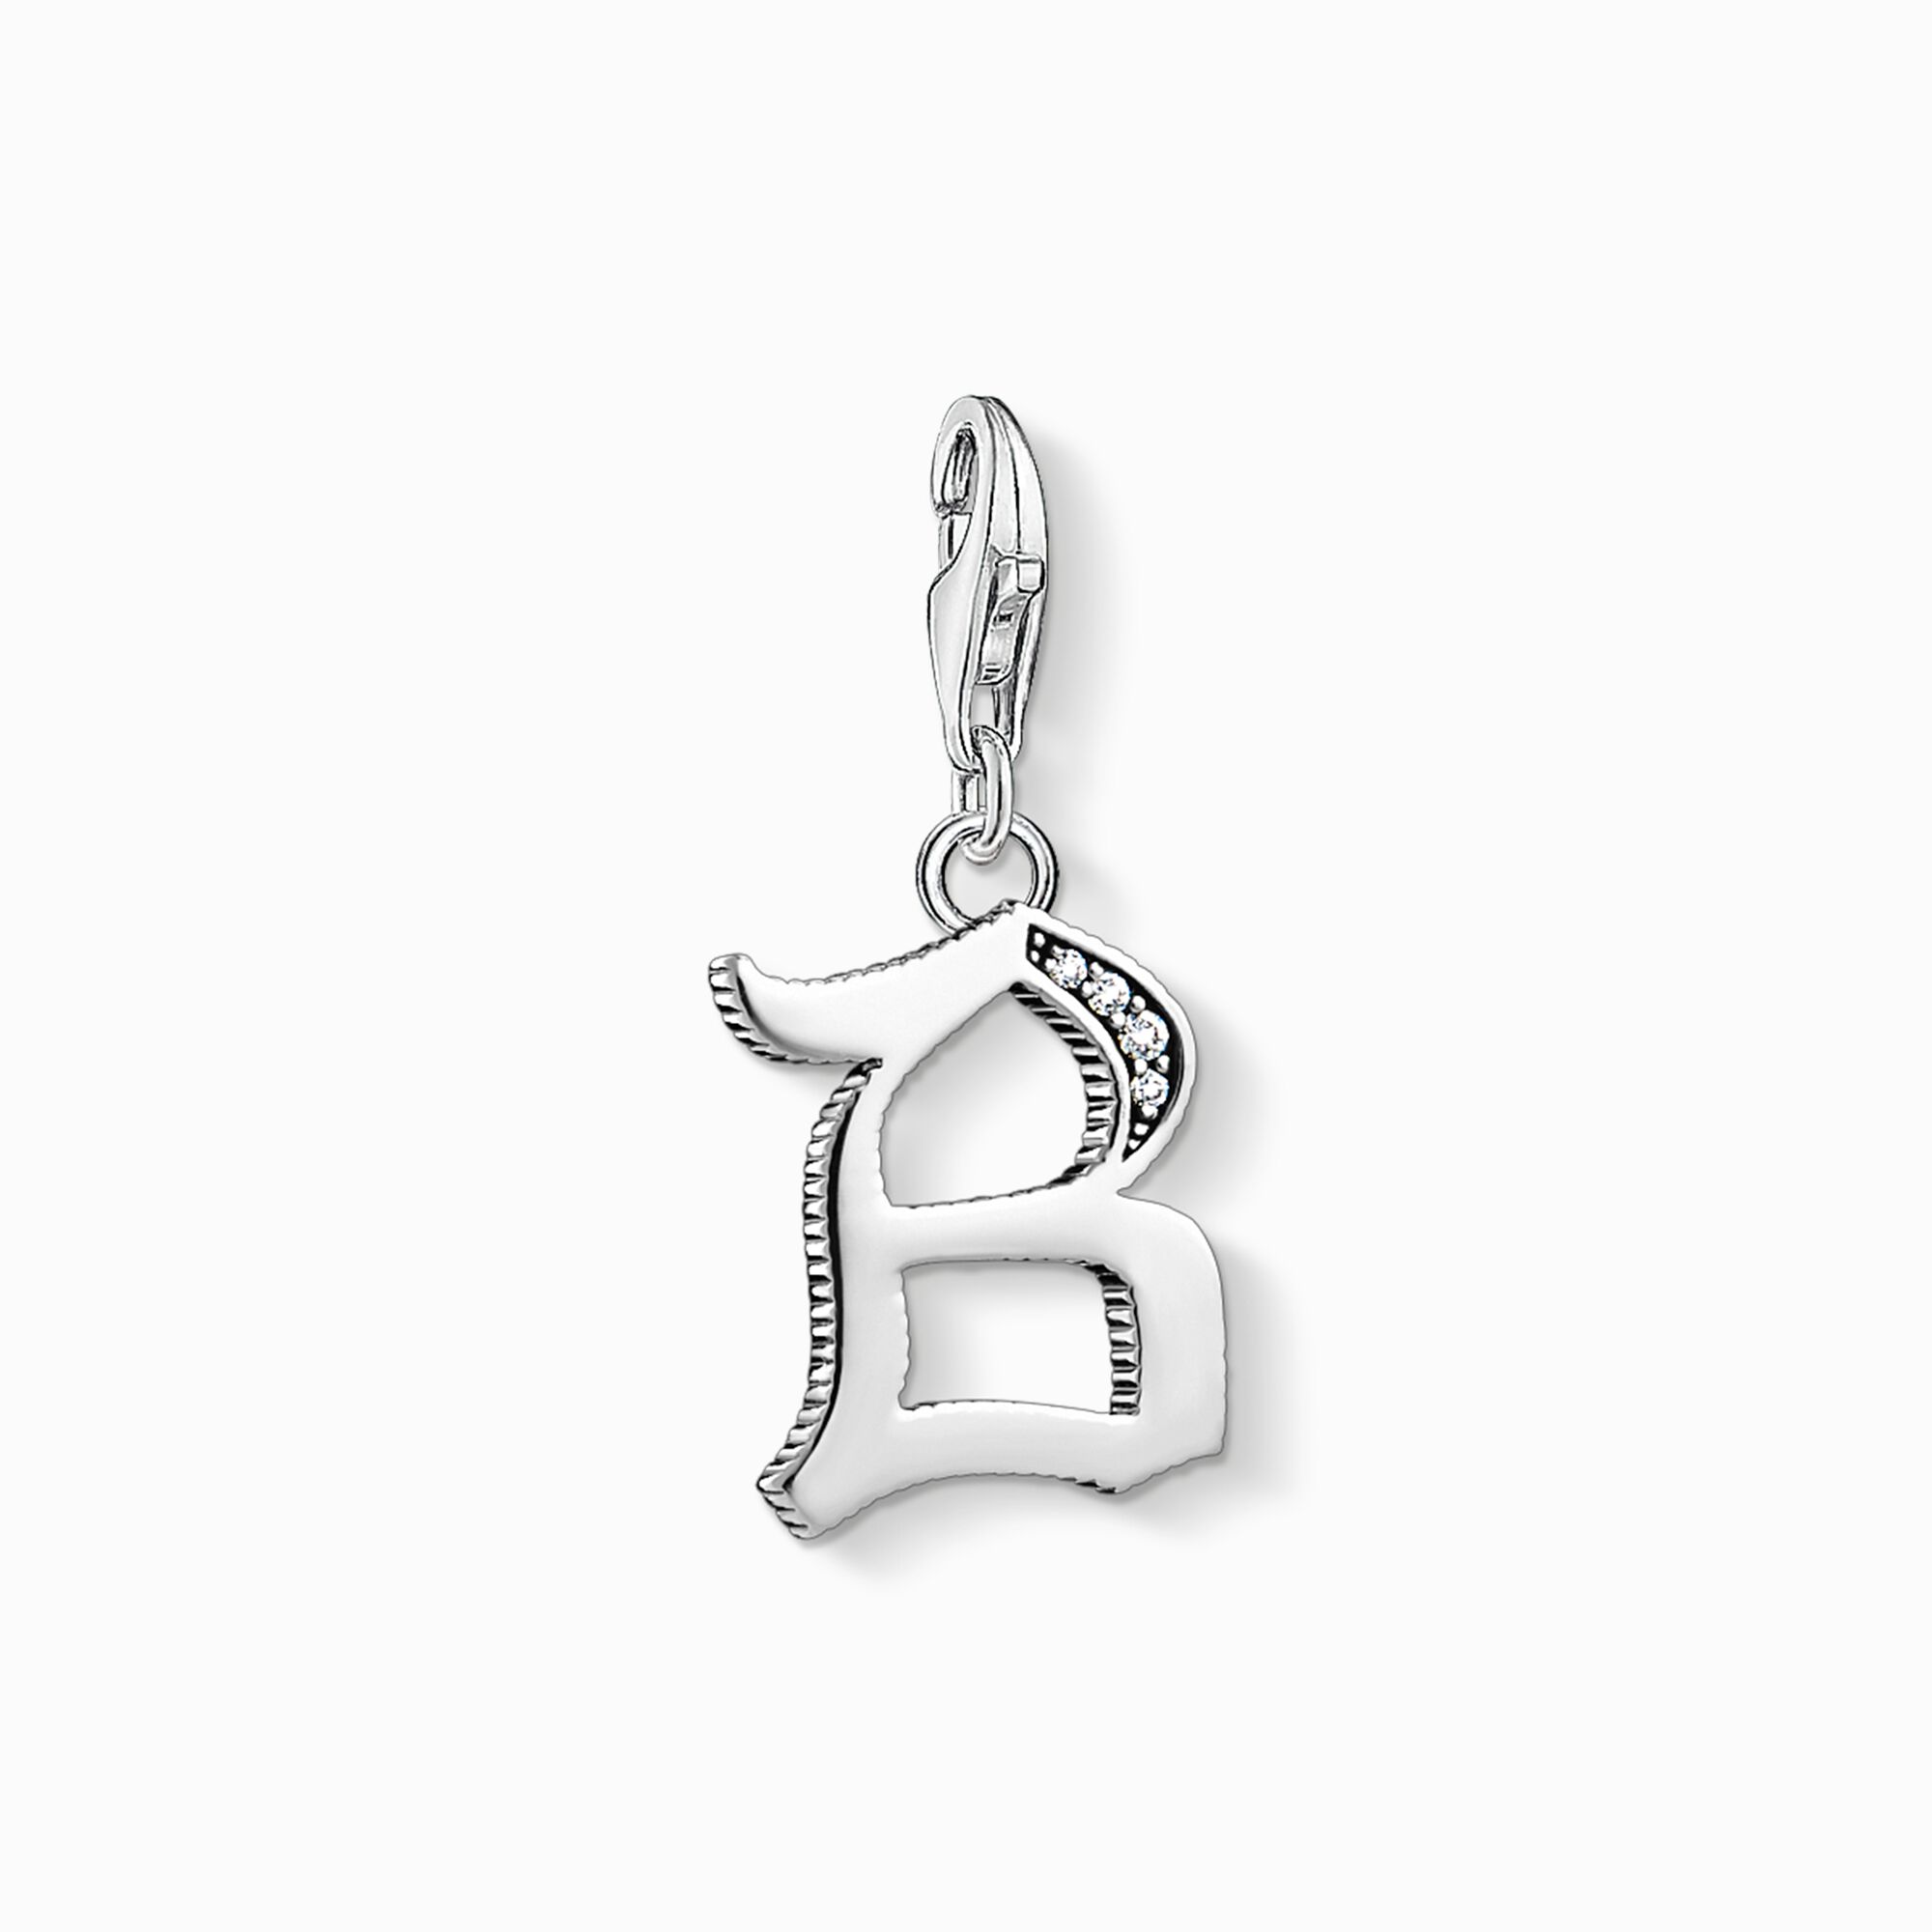 Charm pendant letter B silver from the Charm Club collection in the THOMAS SABO online store